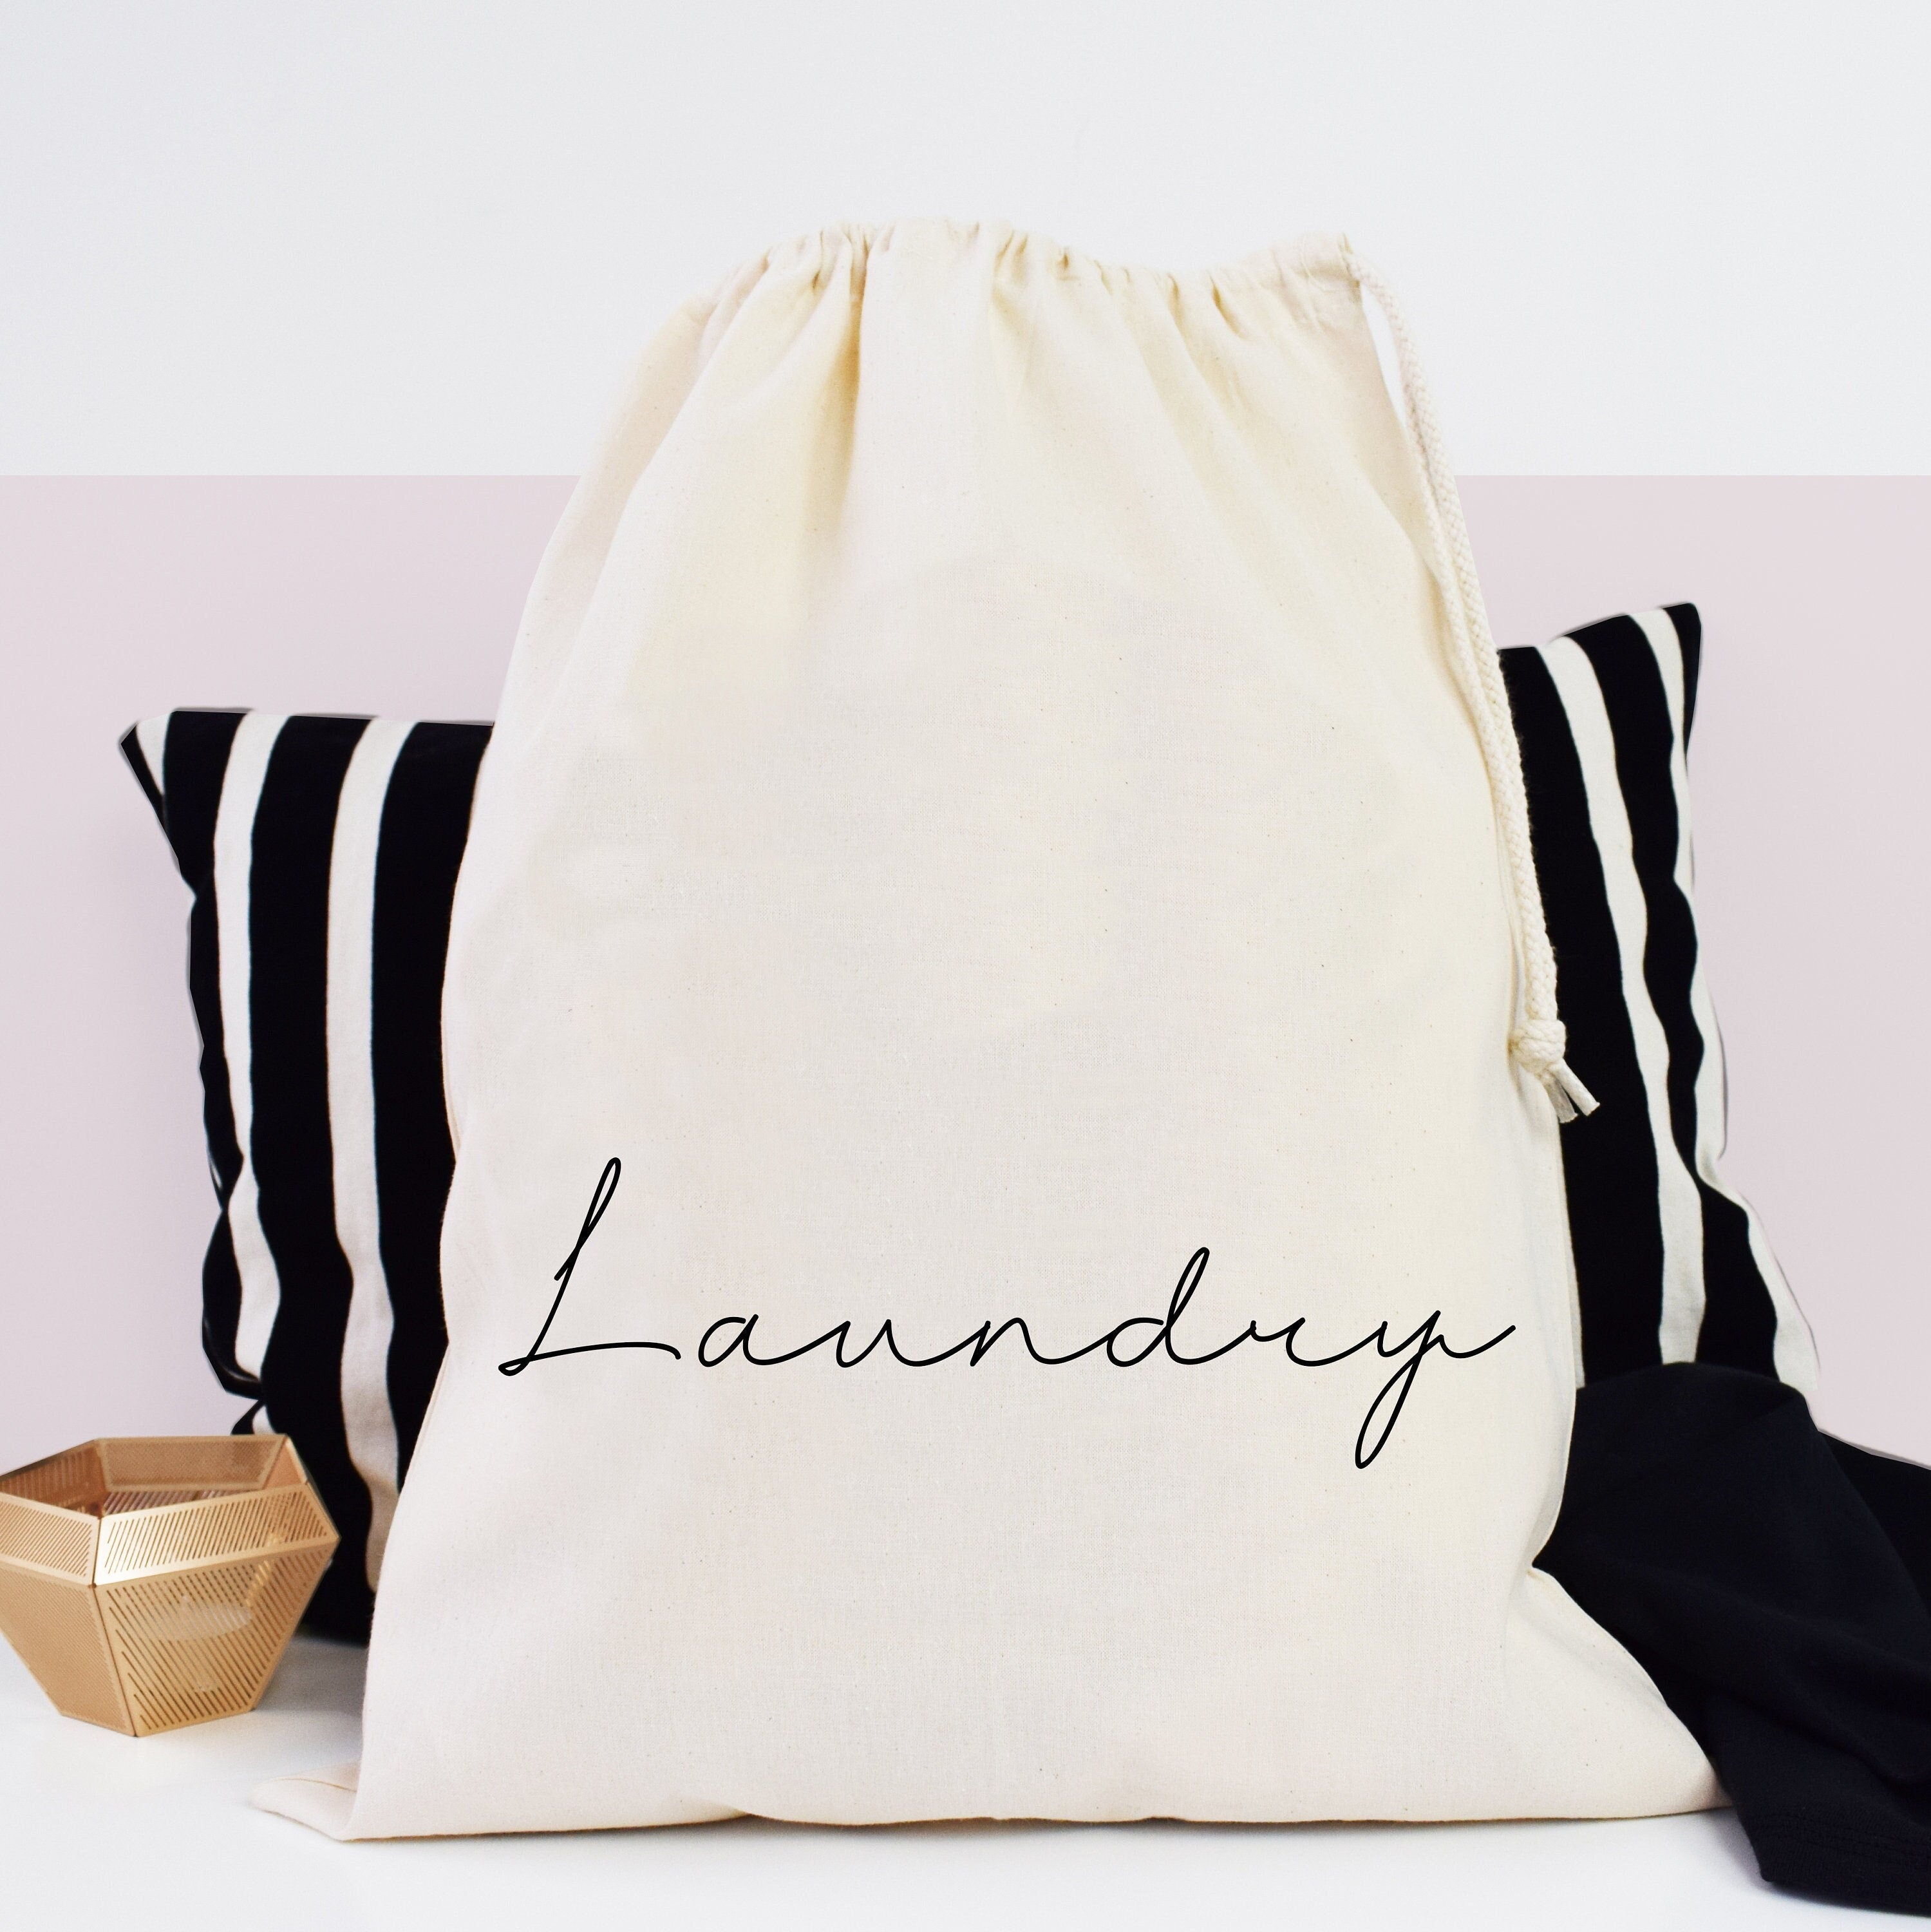 Stylish and Practical Cotton Laundry Bag – Ideal for Travel and Home Use, Two Size Options Available, Gift for Him, Gift for Her